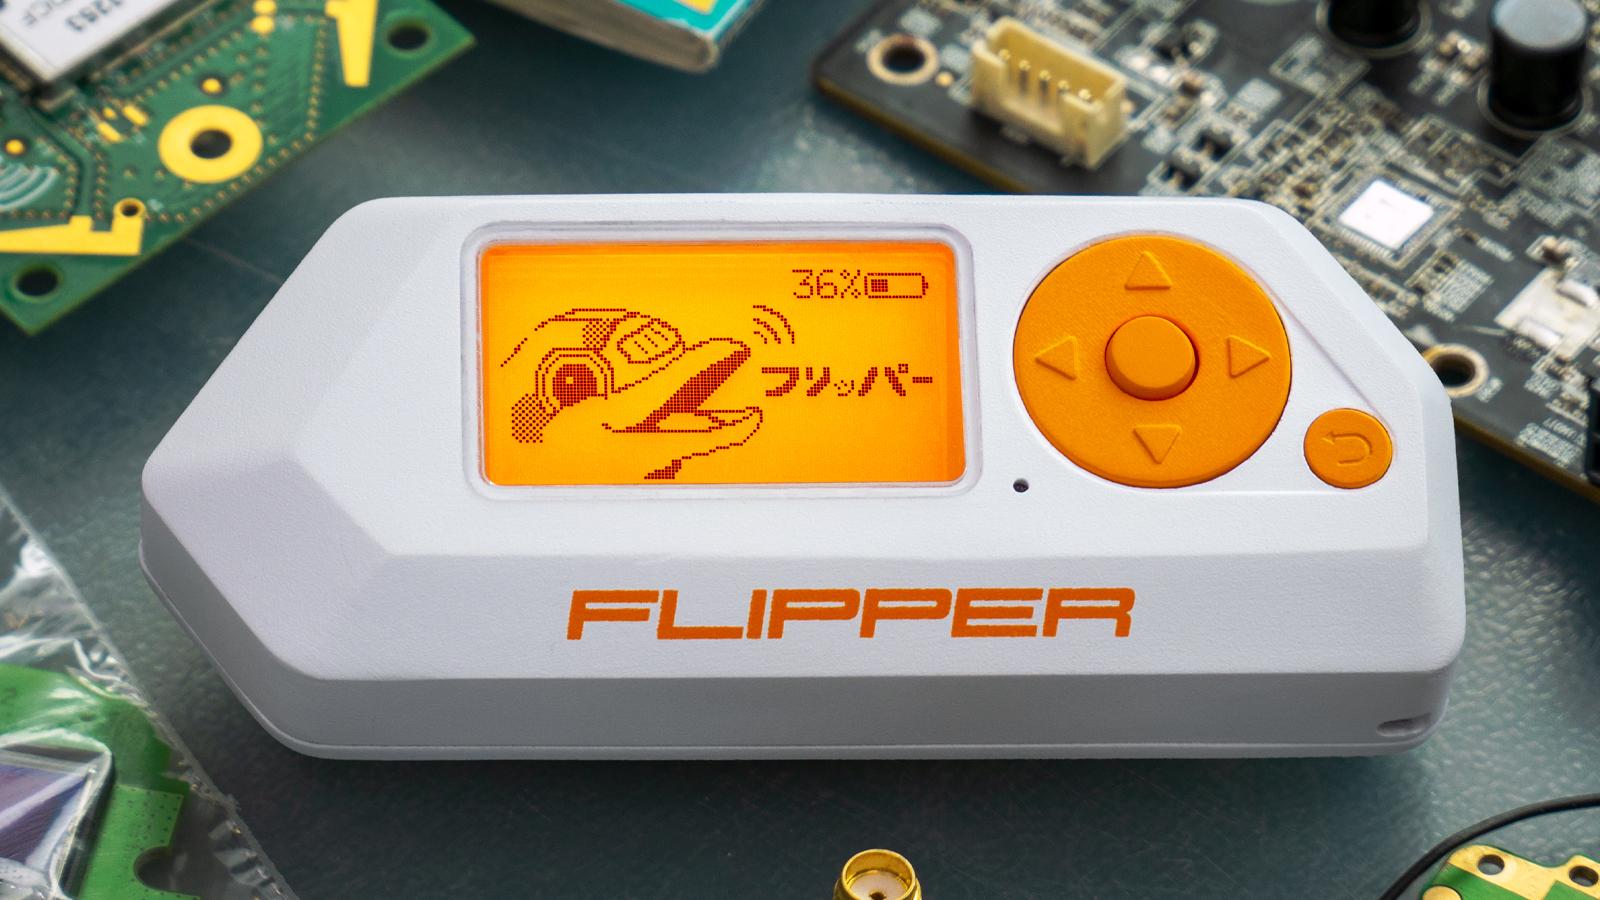 Flipper Zero Is a $200 Device That Can Hack Your Smart Home